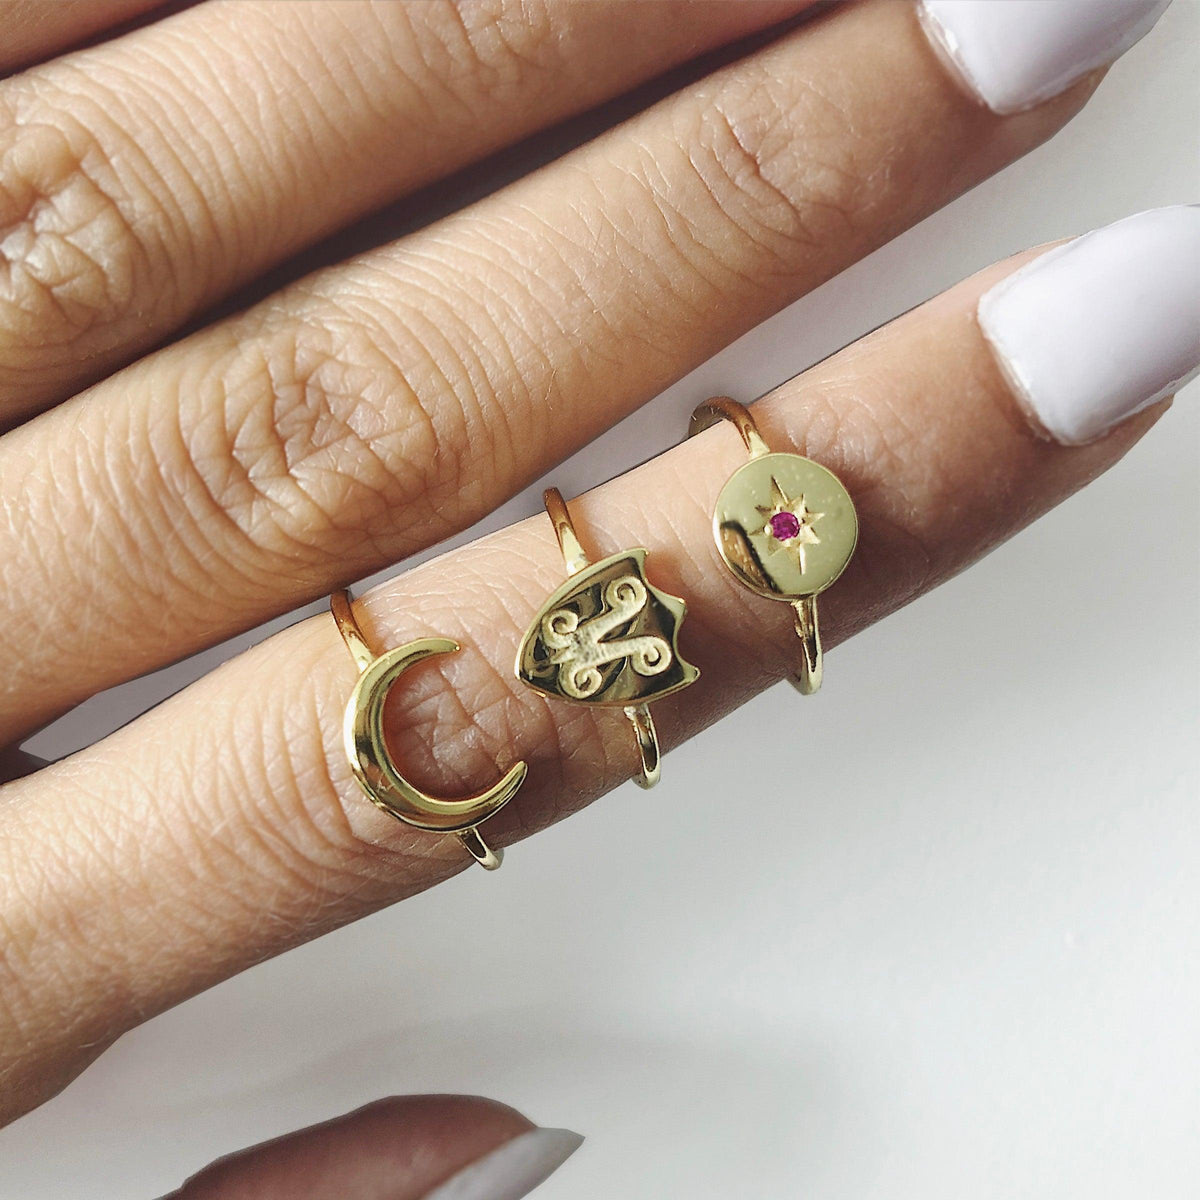 Gold Moon Ring On Woman's Finger